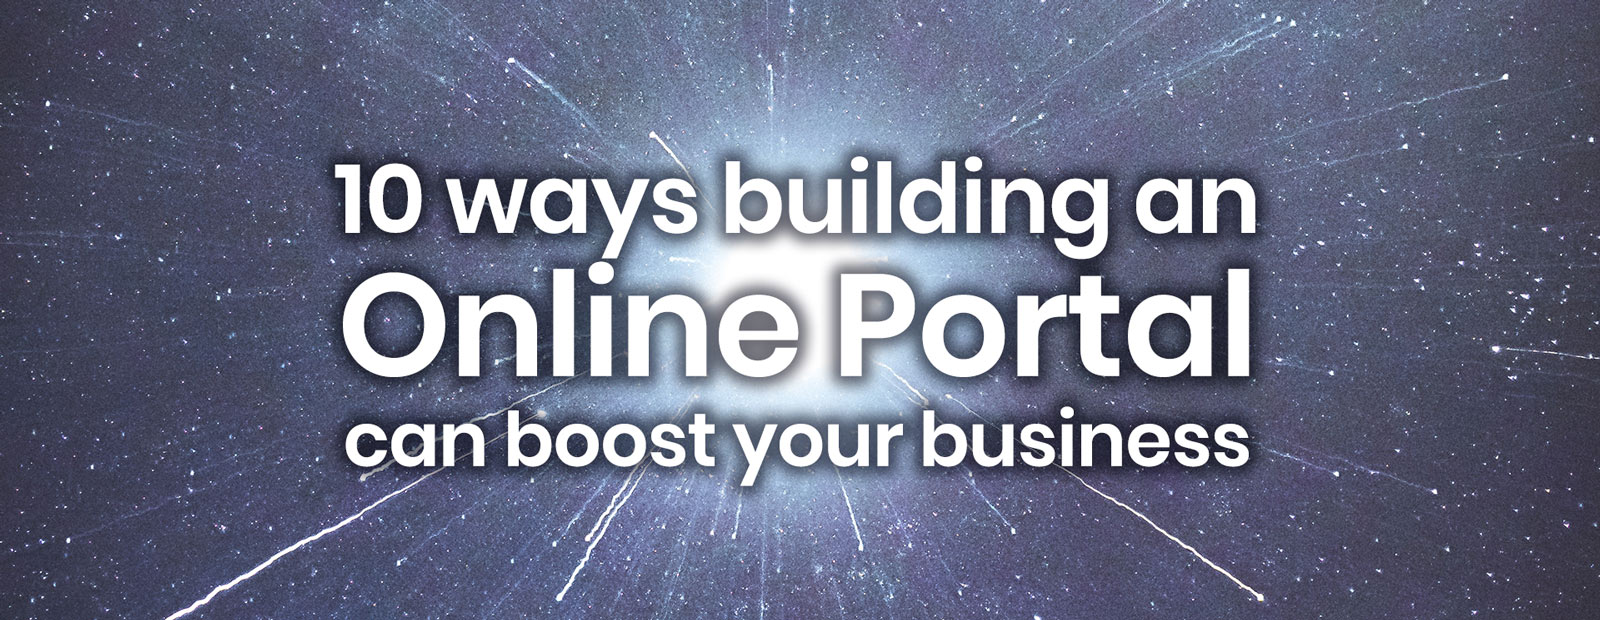 text, how to build an online portal to boost your business: 10 ways building an online portal can boost your business, on top of image of a star exploding